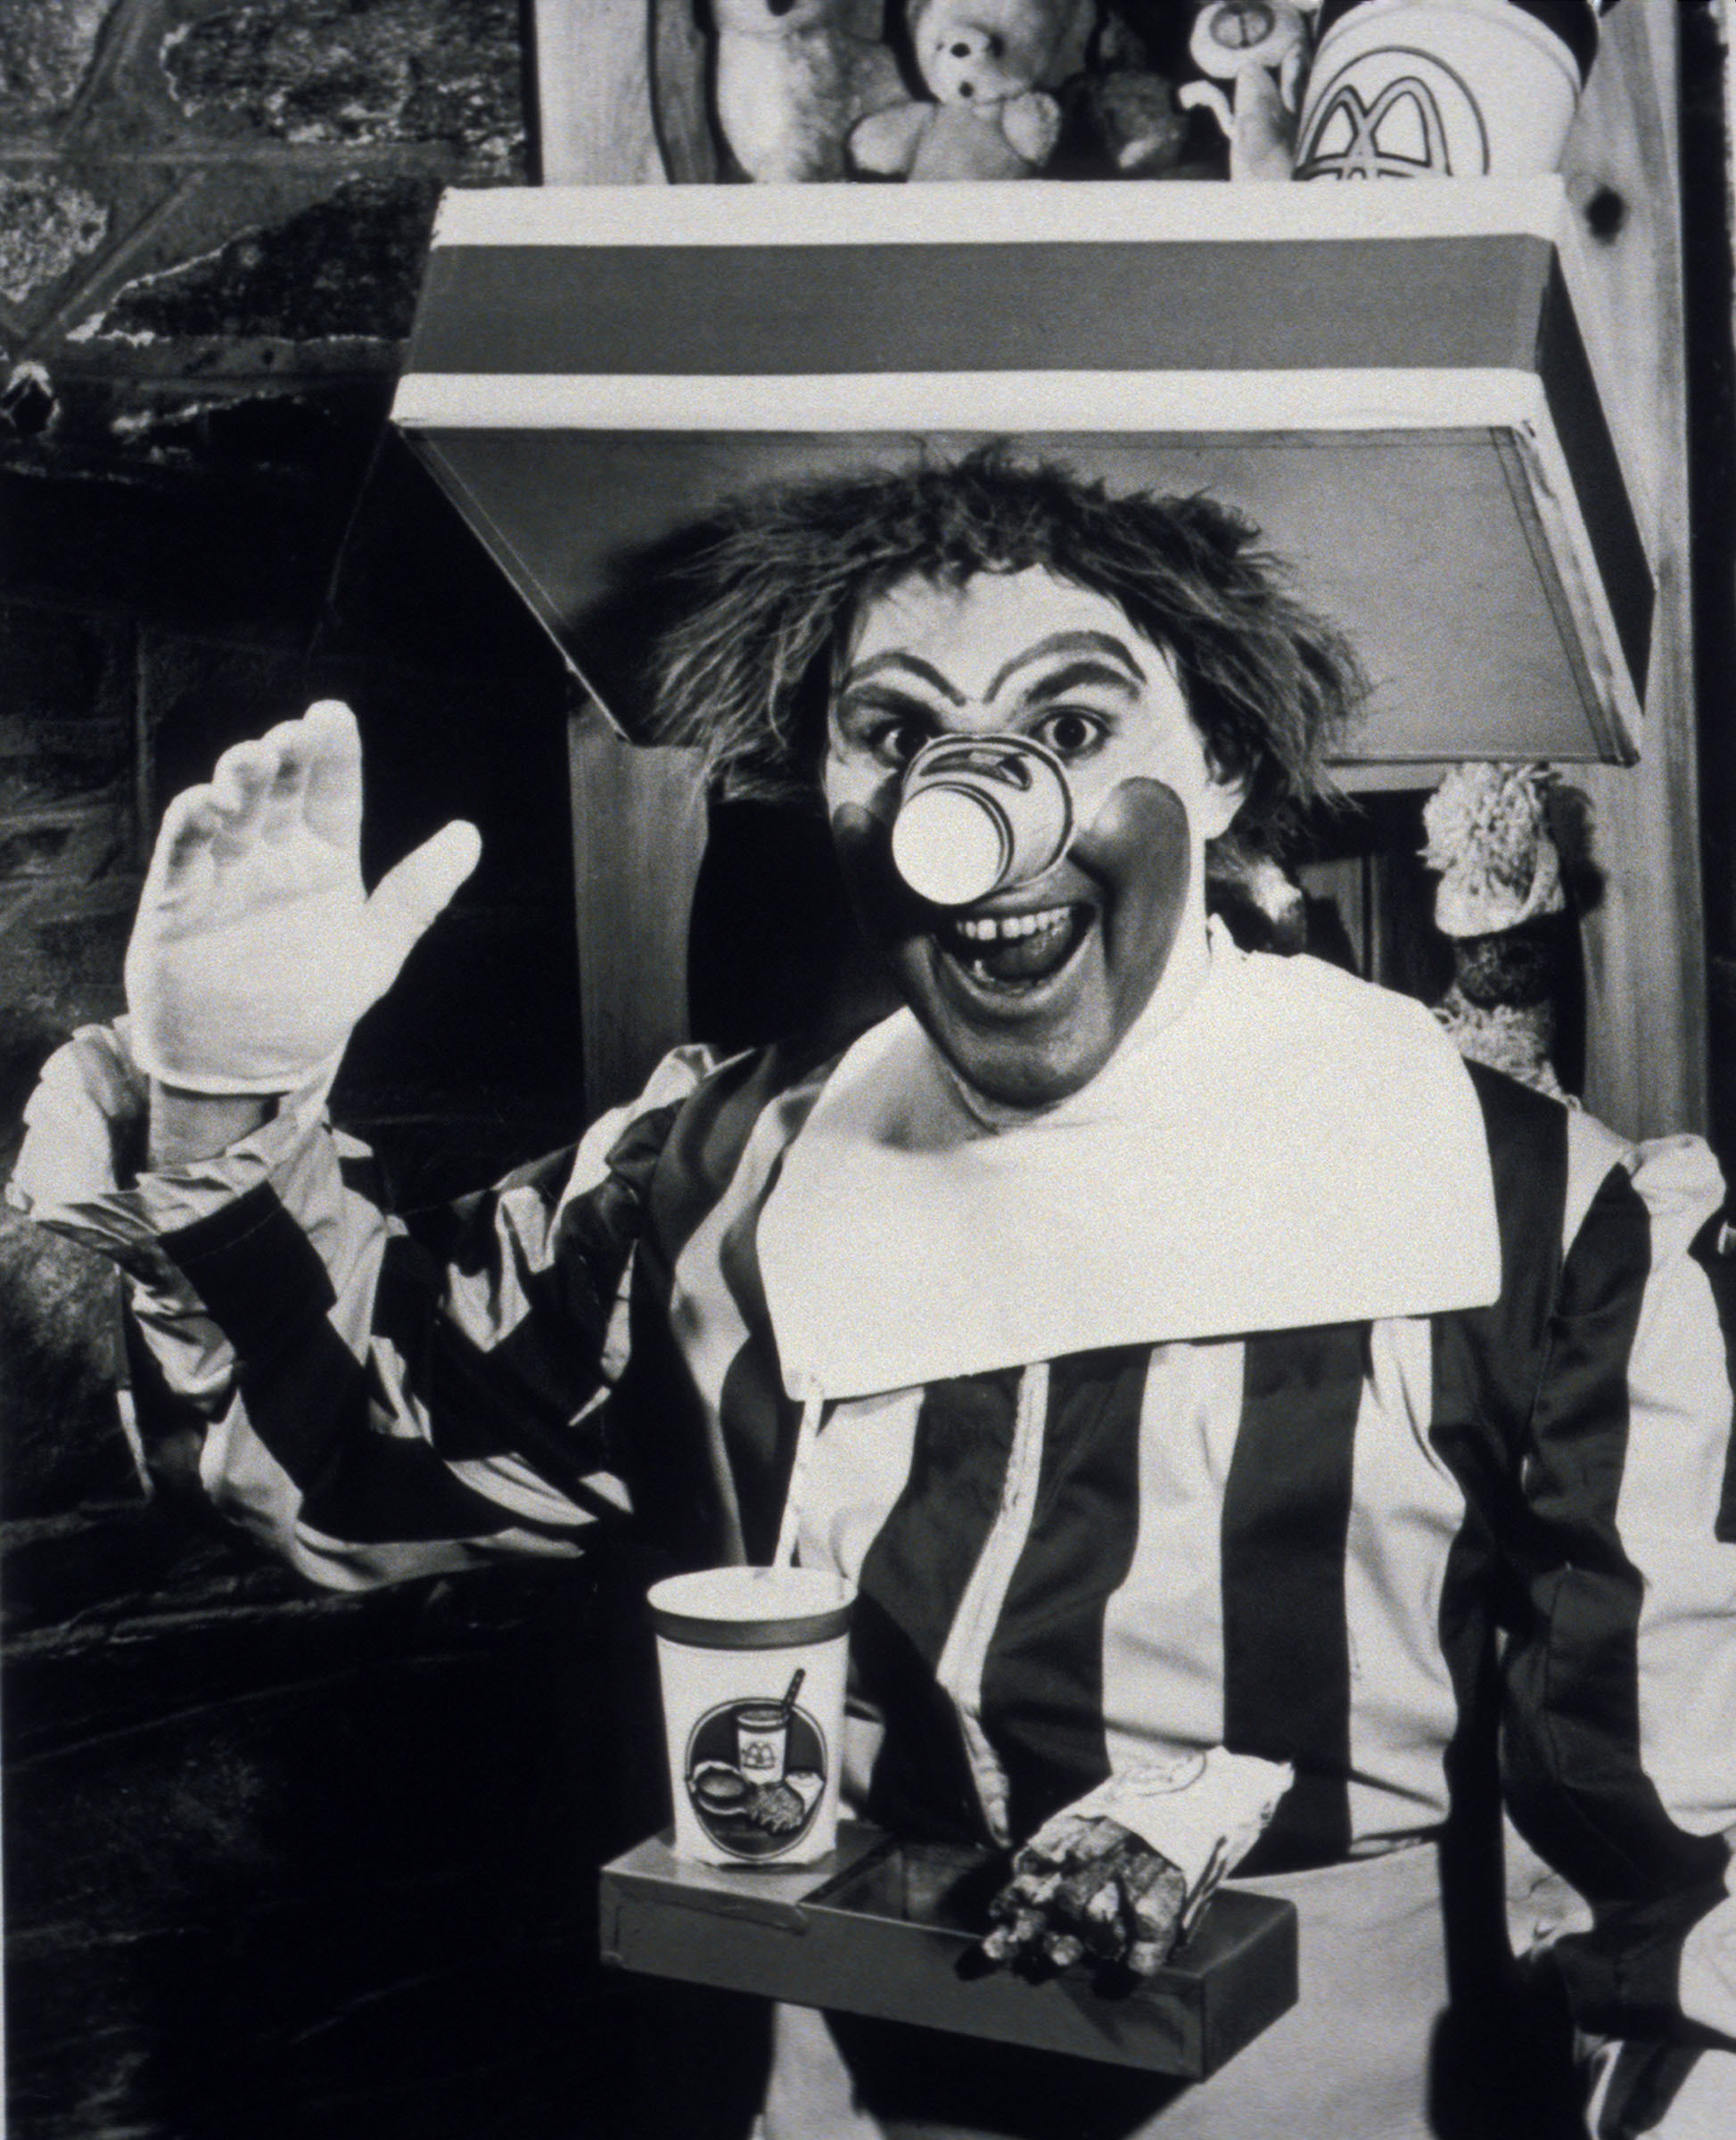 Man in a clown costume waving and smiling with a McDonald&#x27;s cup and fries in front of him